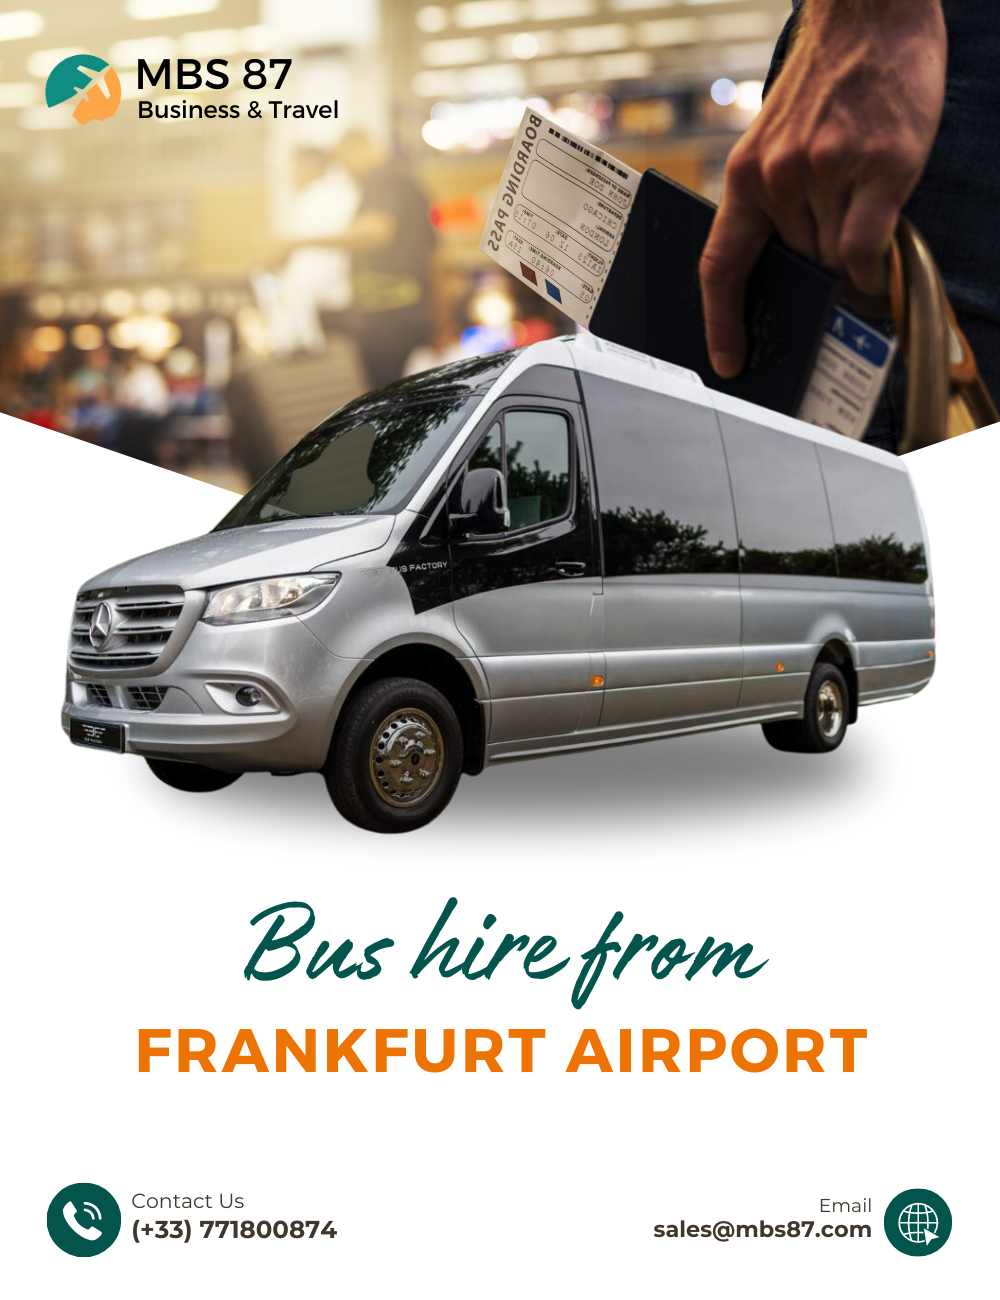 How to Choose the Right Airport Transfer Service in Frankfurt